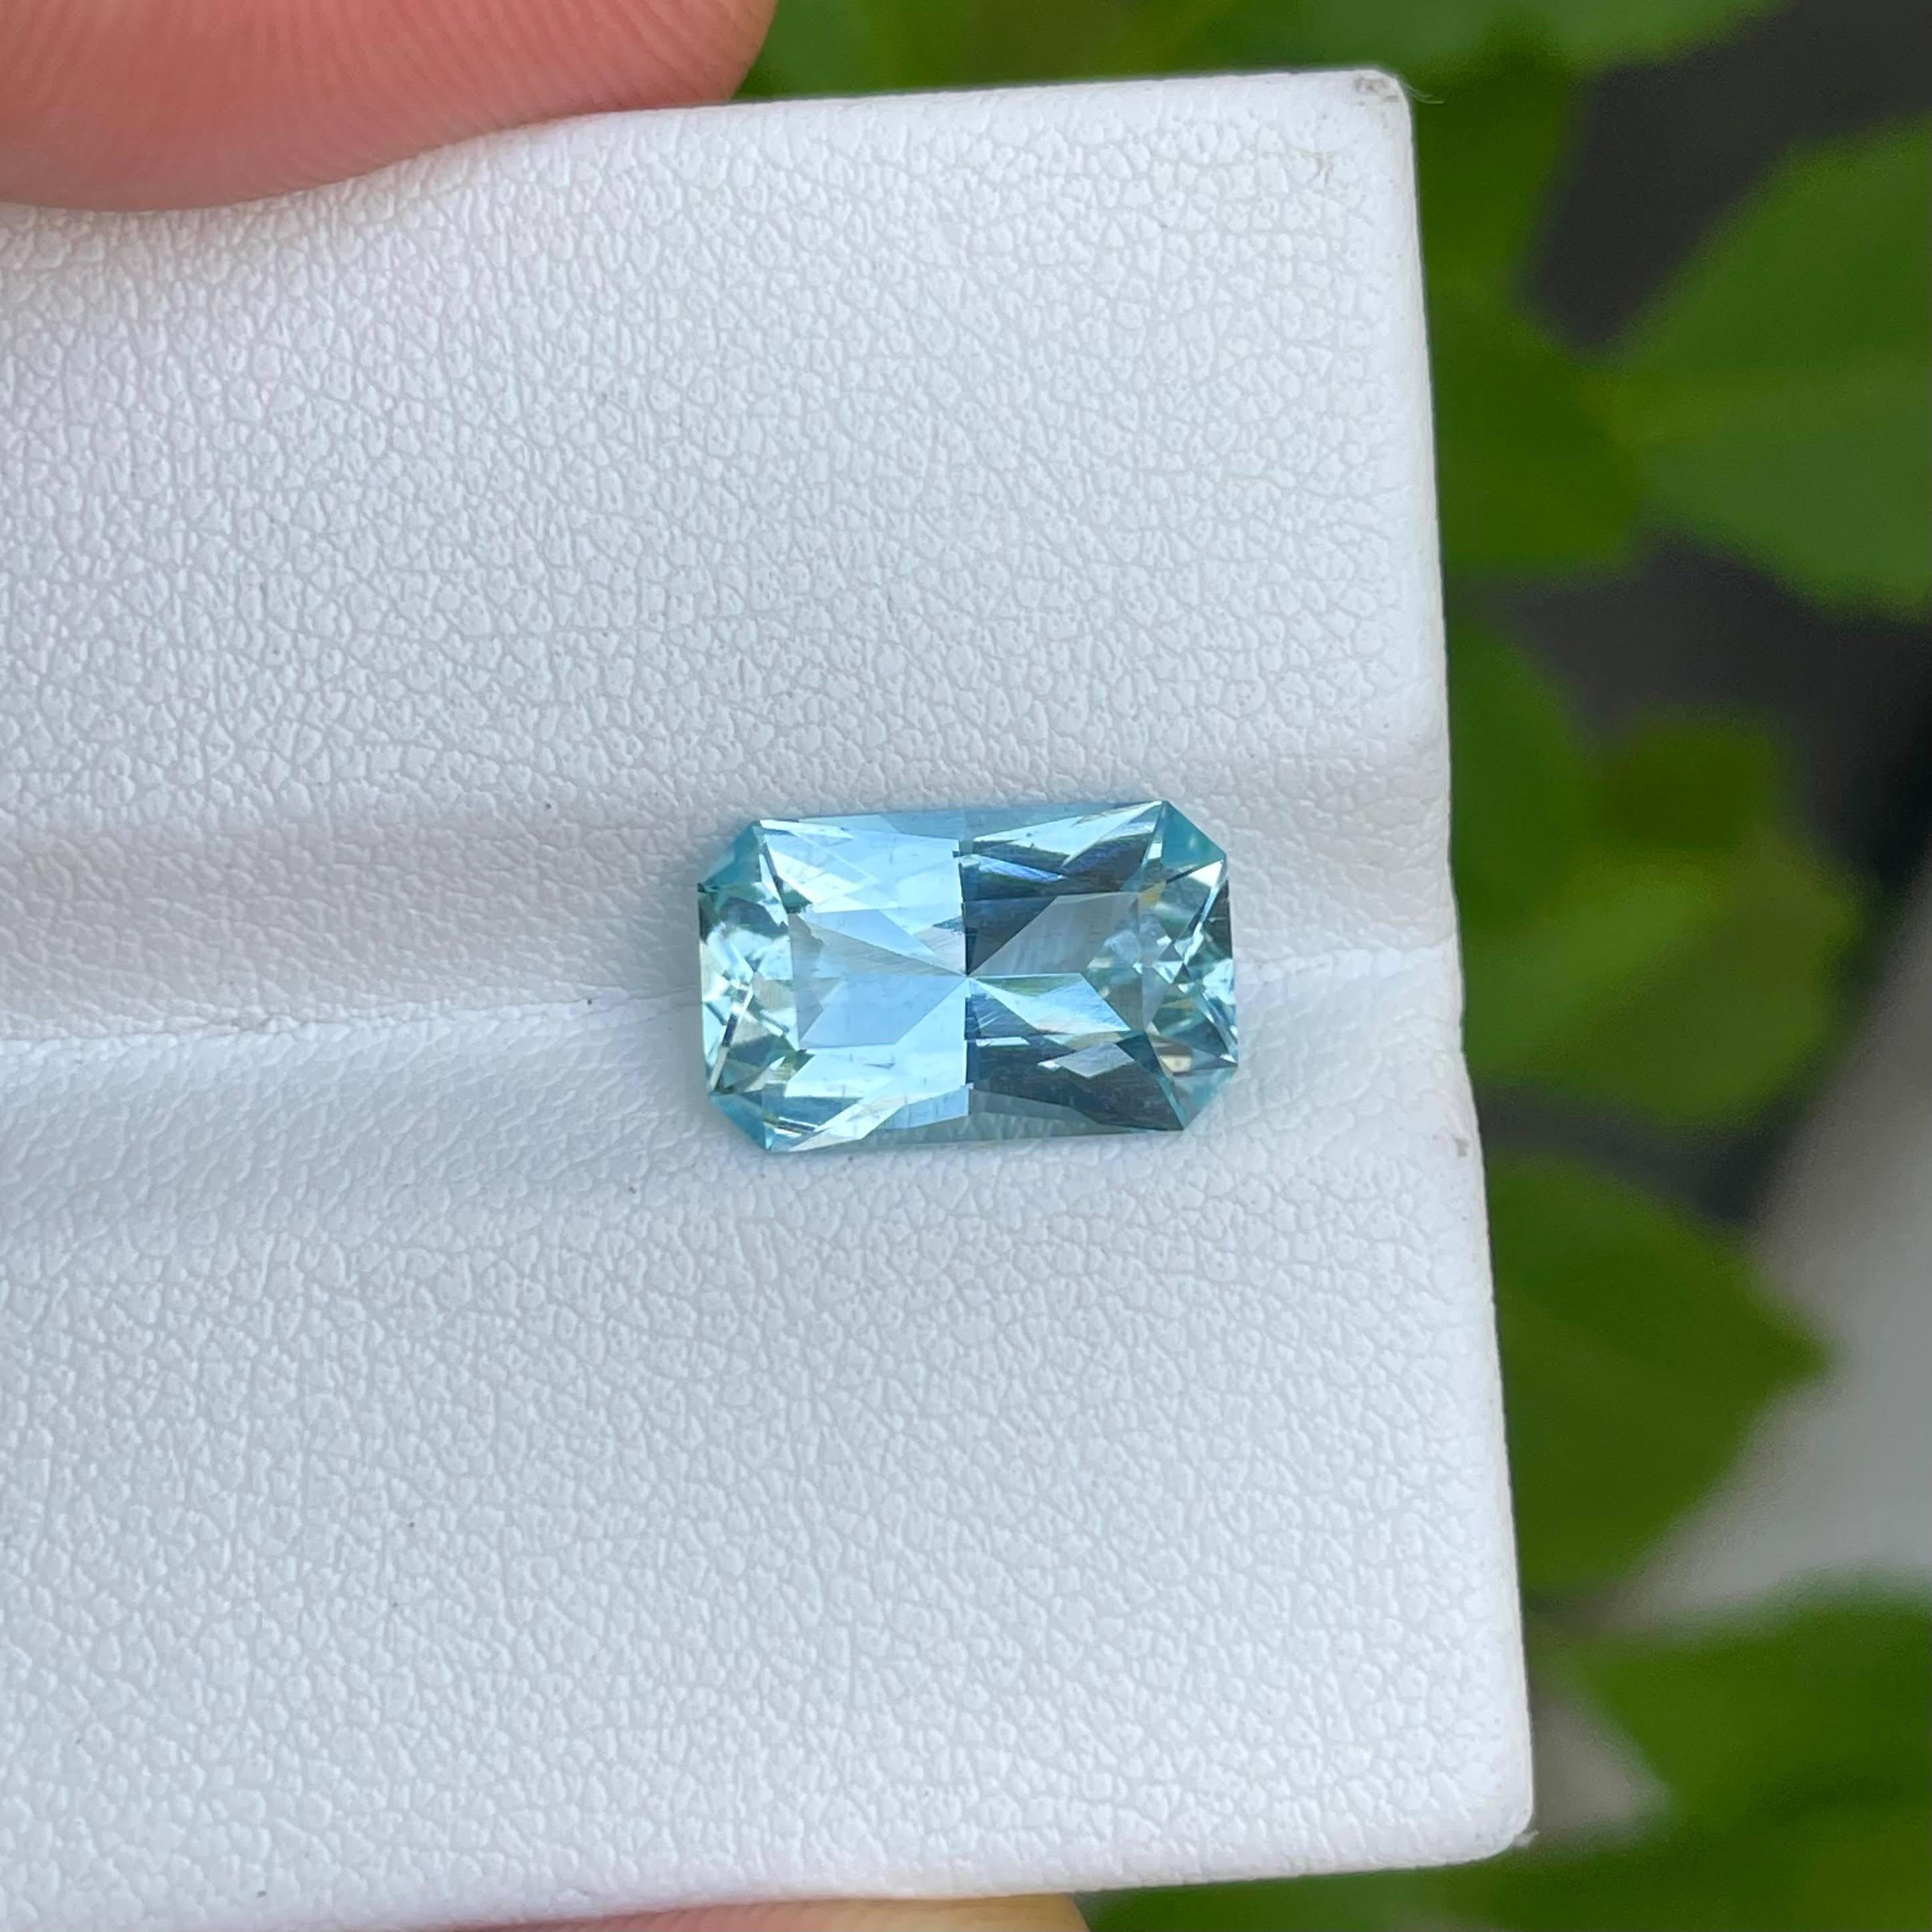 Weight 3.40 carats 
Dimensions 12.2x7.7x5.5 mm
Treatment none 
Origin Nigeria 
Clarity VVS
Shape octagon 
Cut custom precision 




This exquisite gemstone boasts a captivating 3.40 carat Aquamarine of unparalleled quality, sourced from the rich